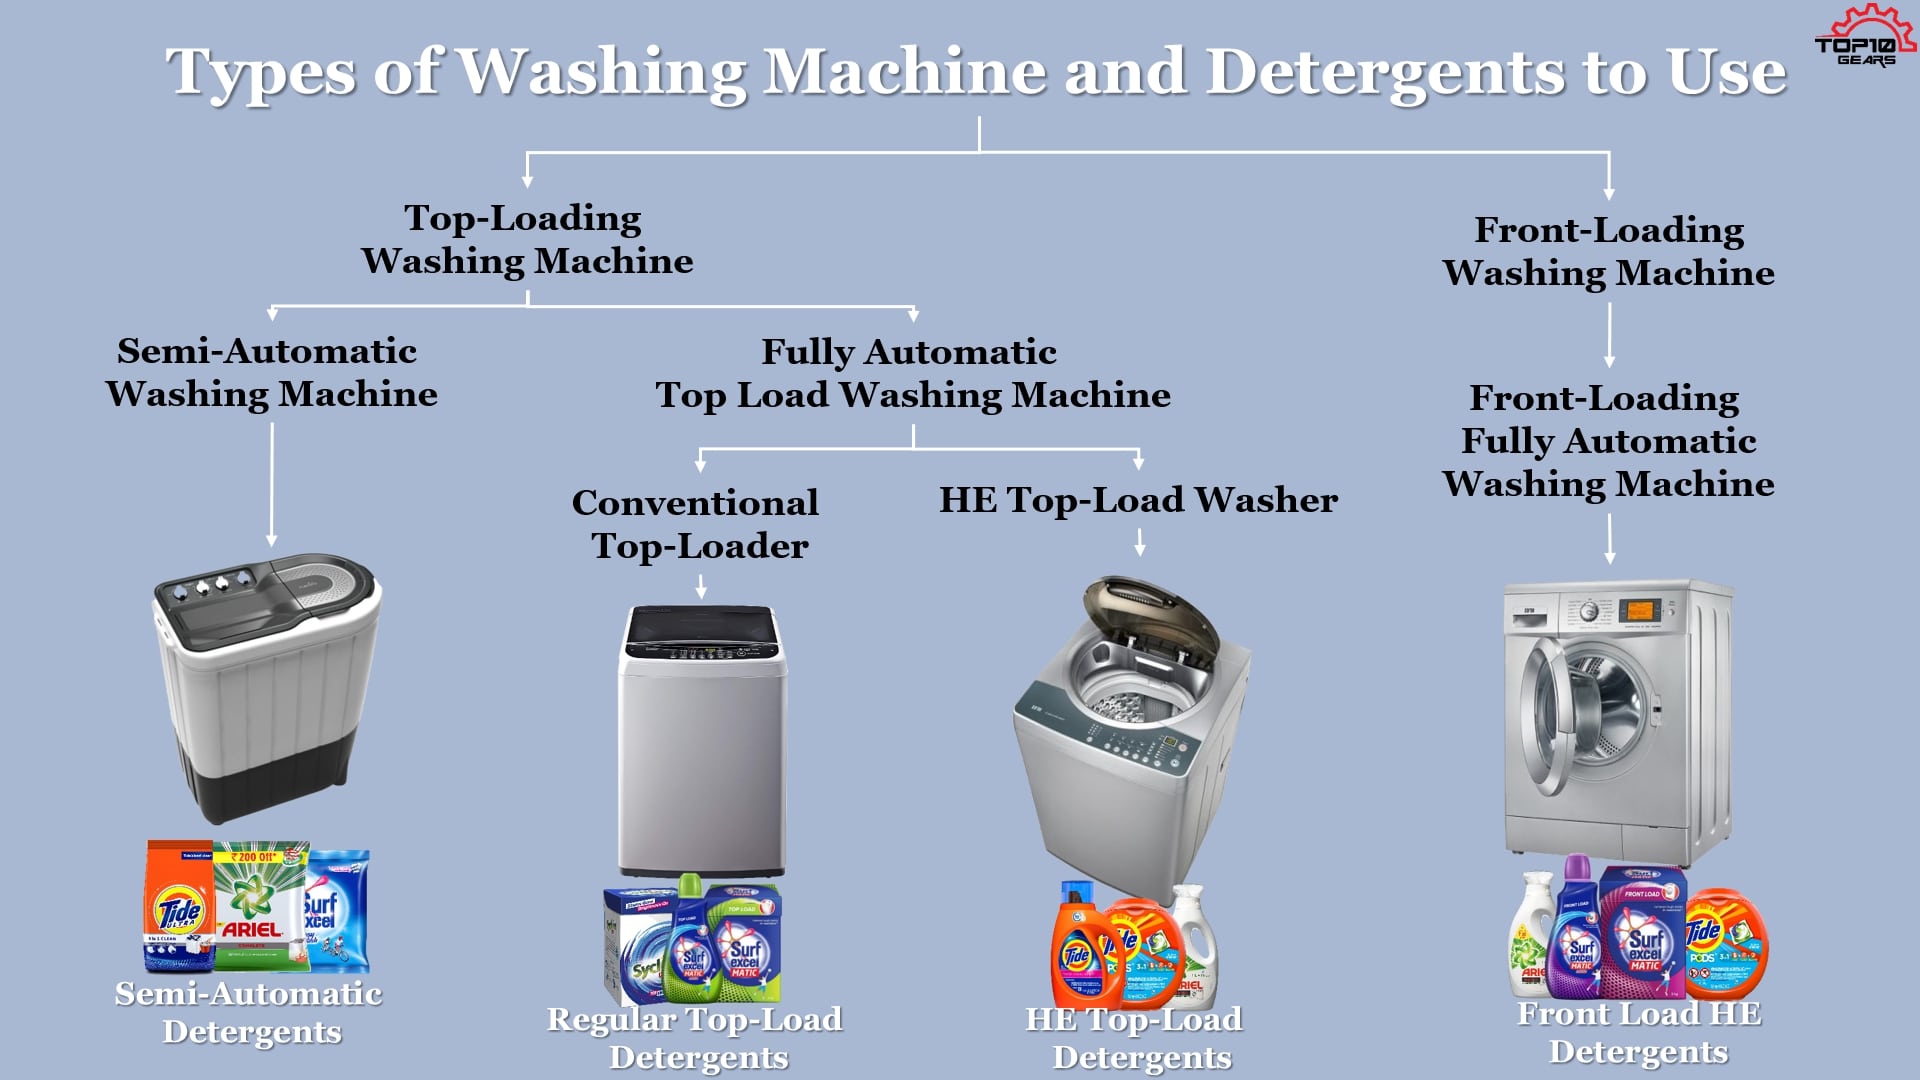 Types of Washing Machines and Detergents to use